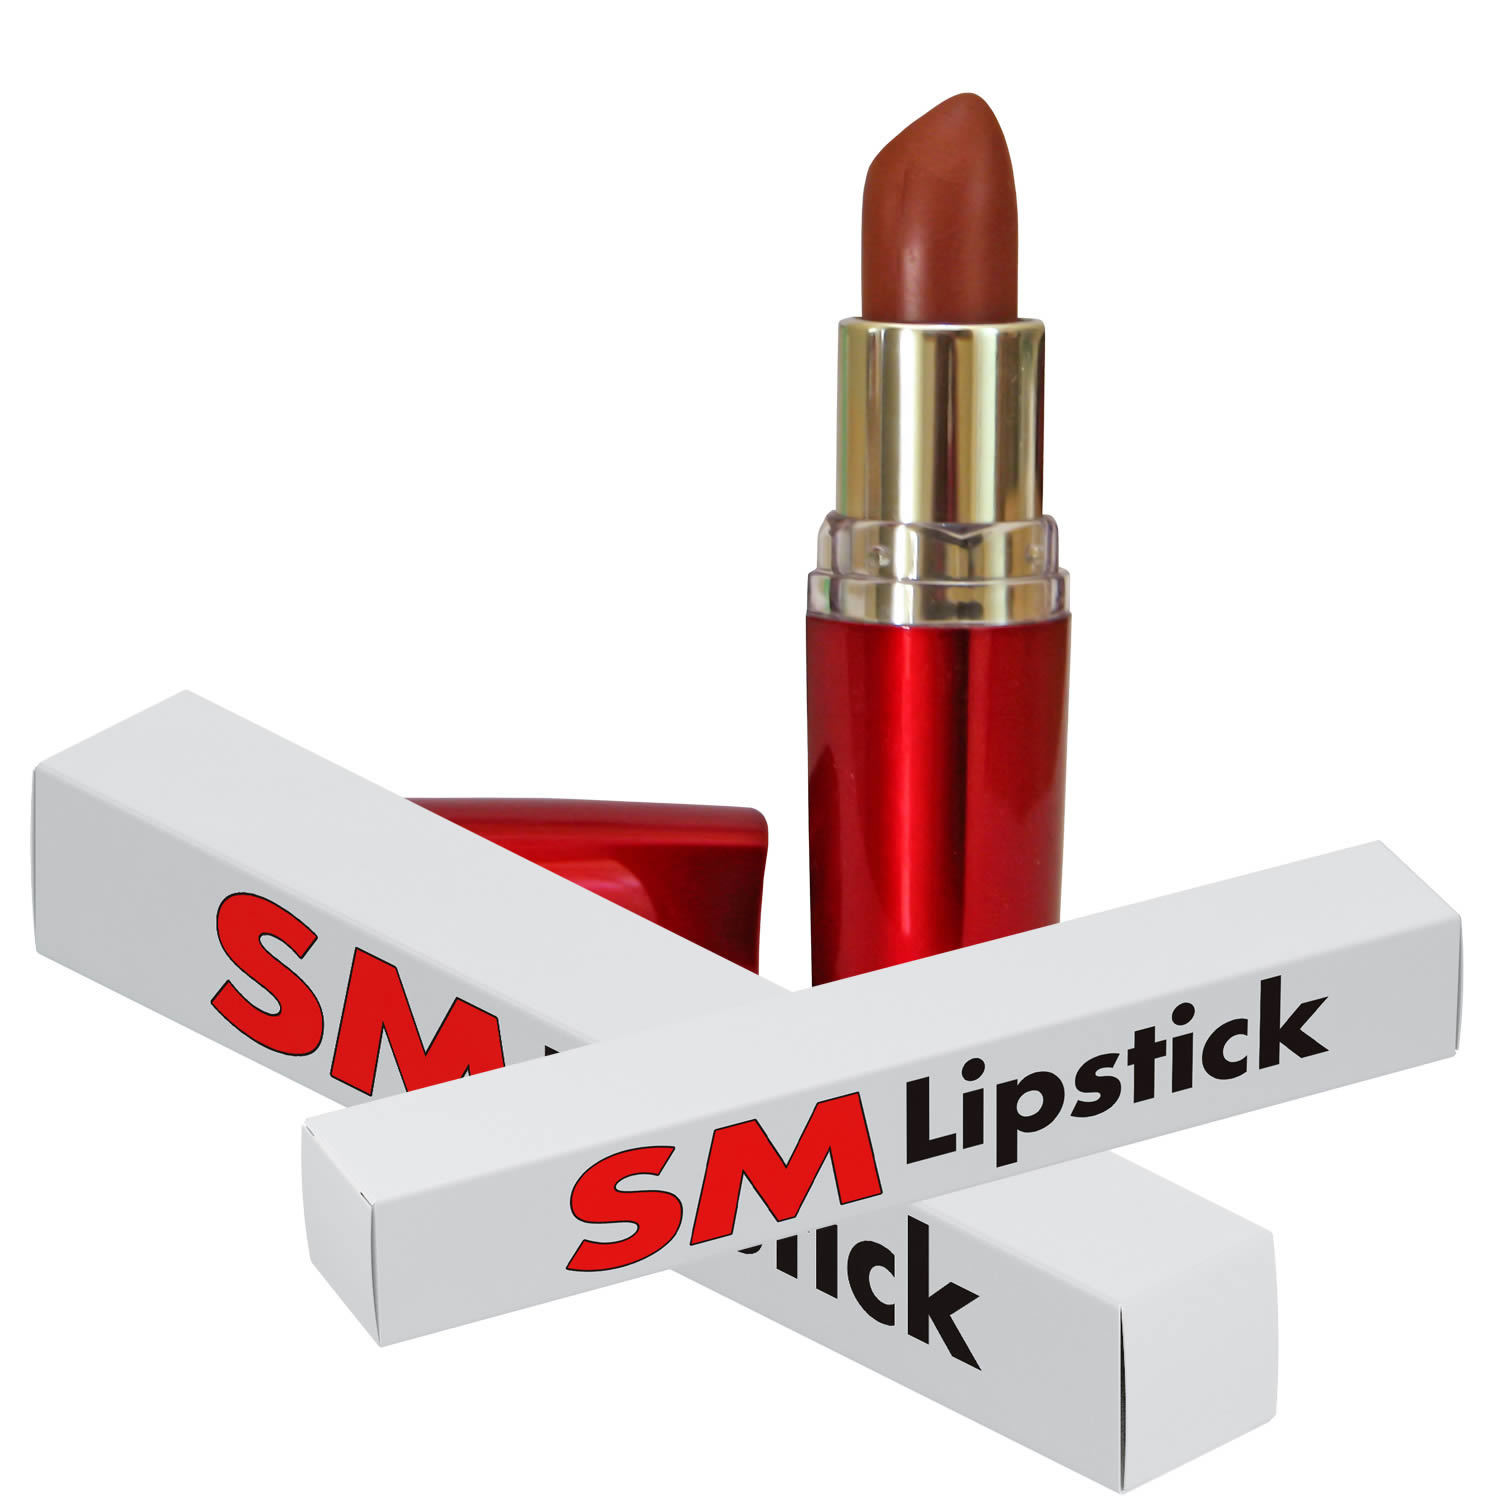 Wholesale Lipstick Boxes: Excellent Option for Growing Your Business.